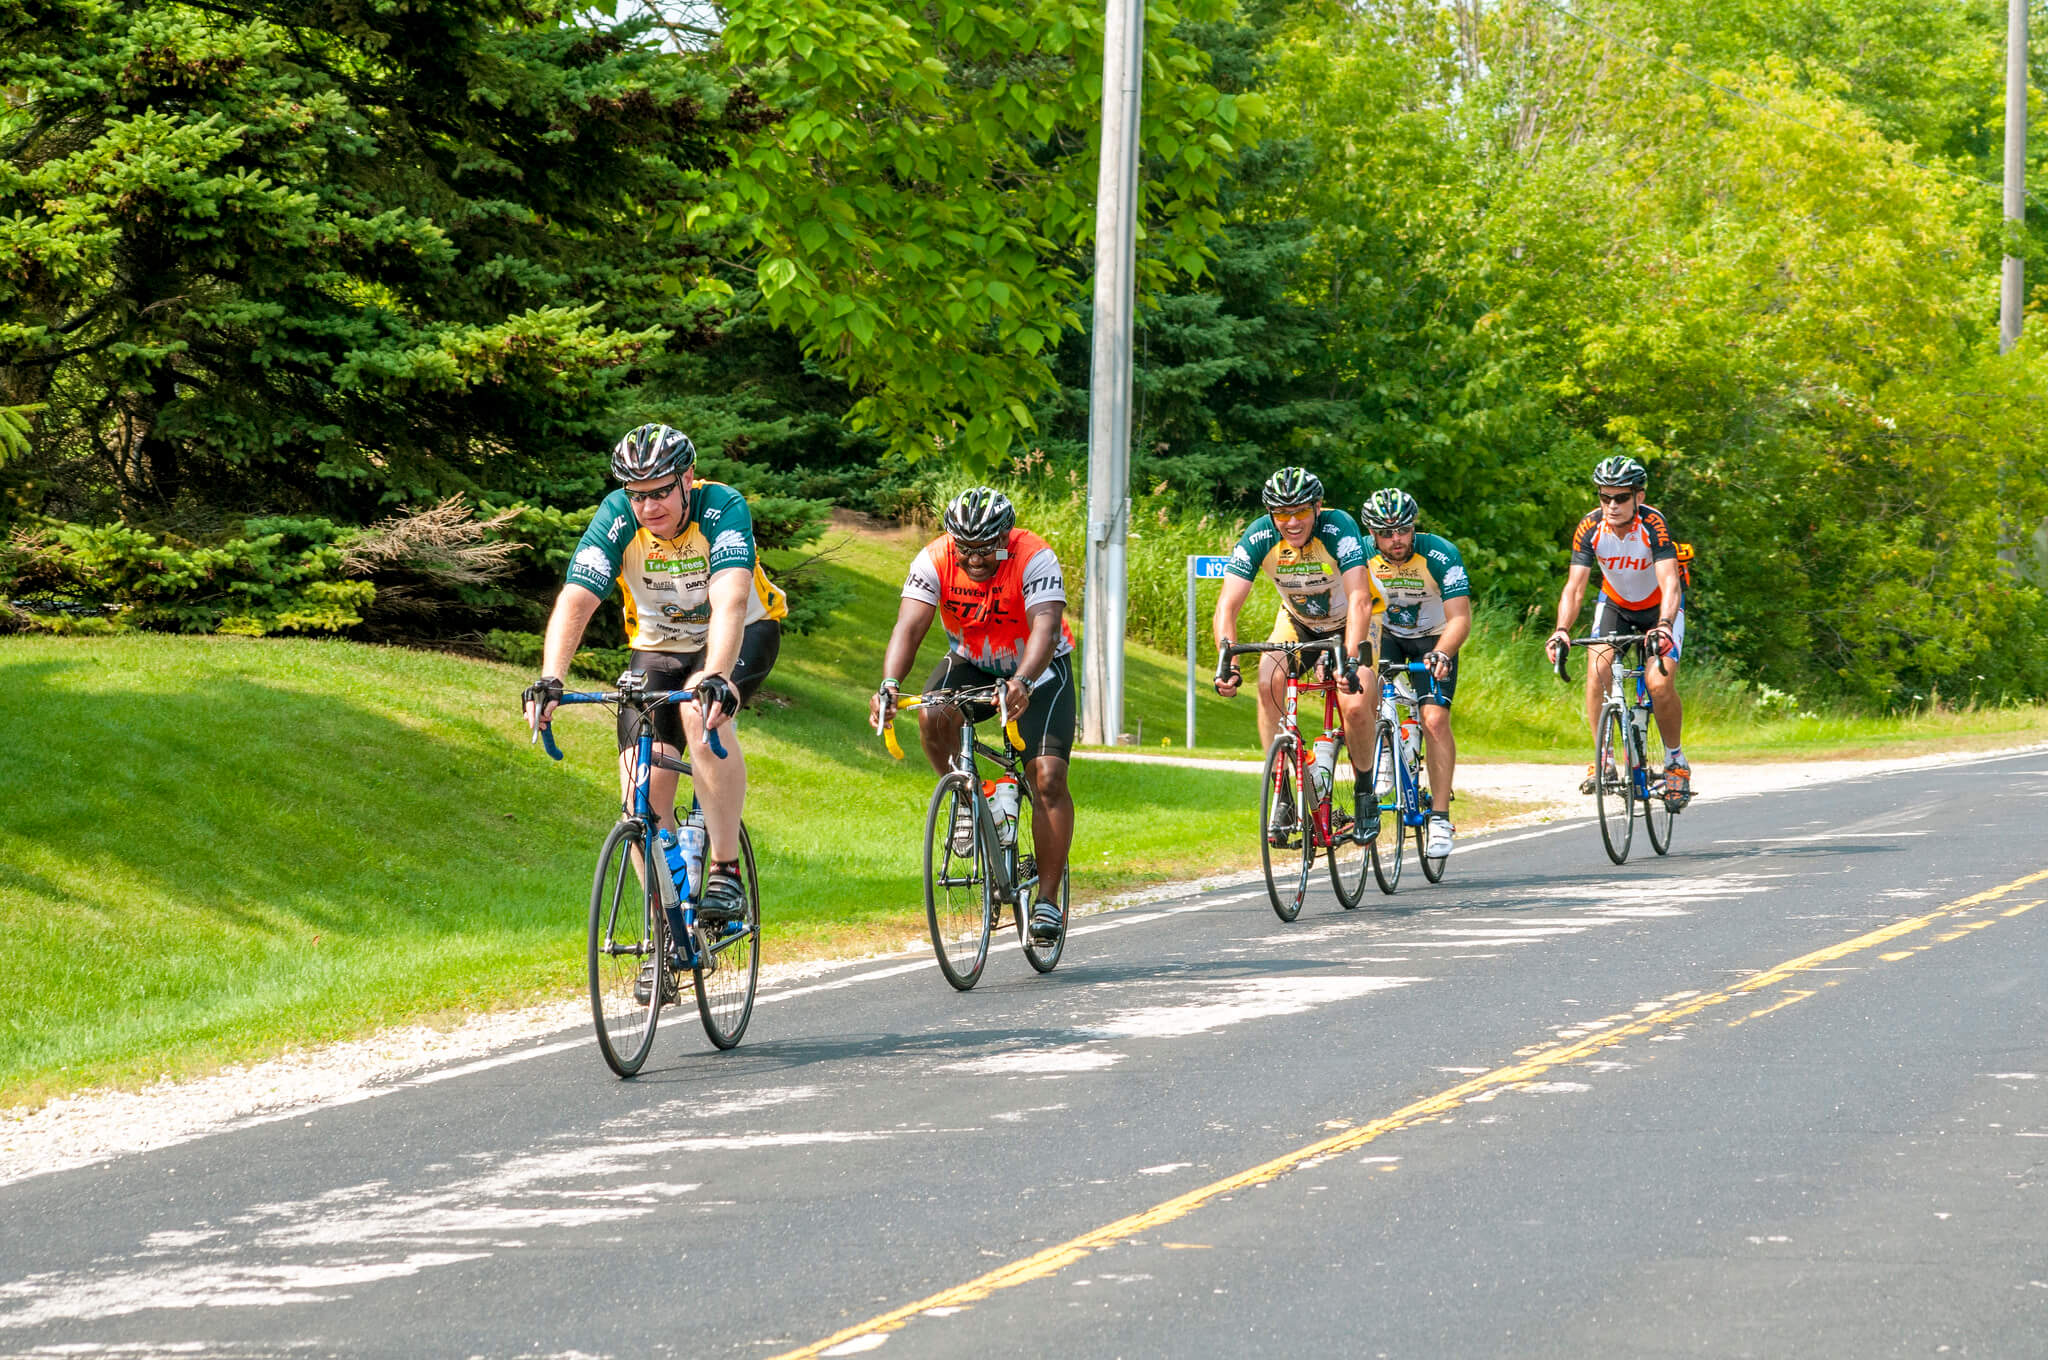 Cyclists on a trail. Vilas County has created many bike trails thanks to Knowles-Nelson.